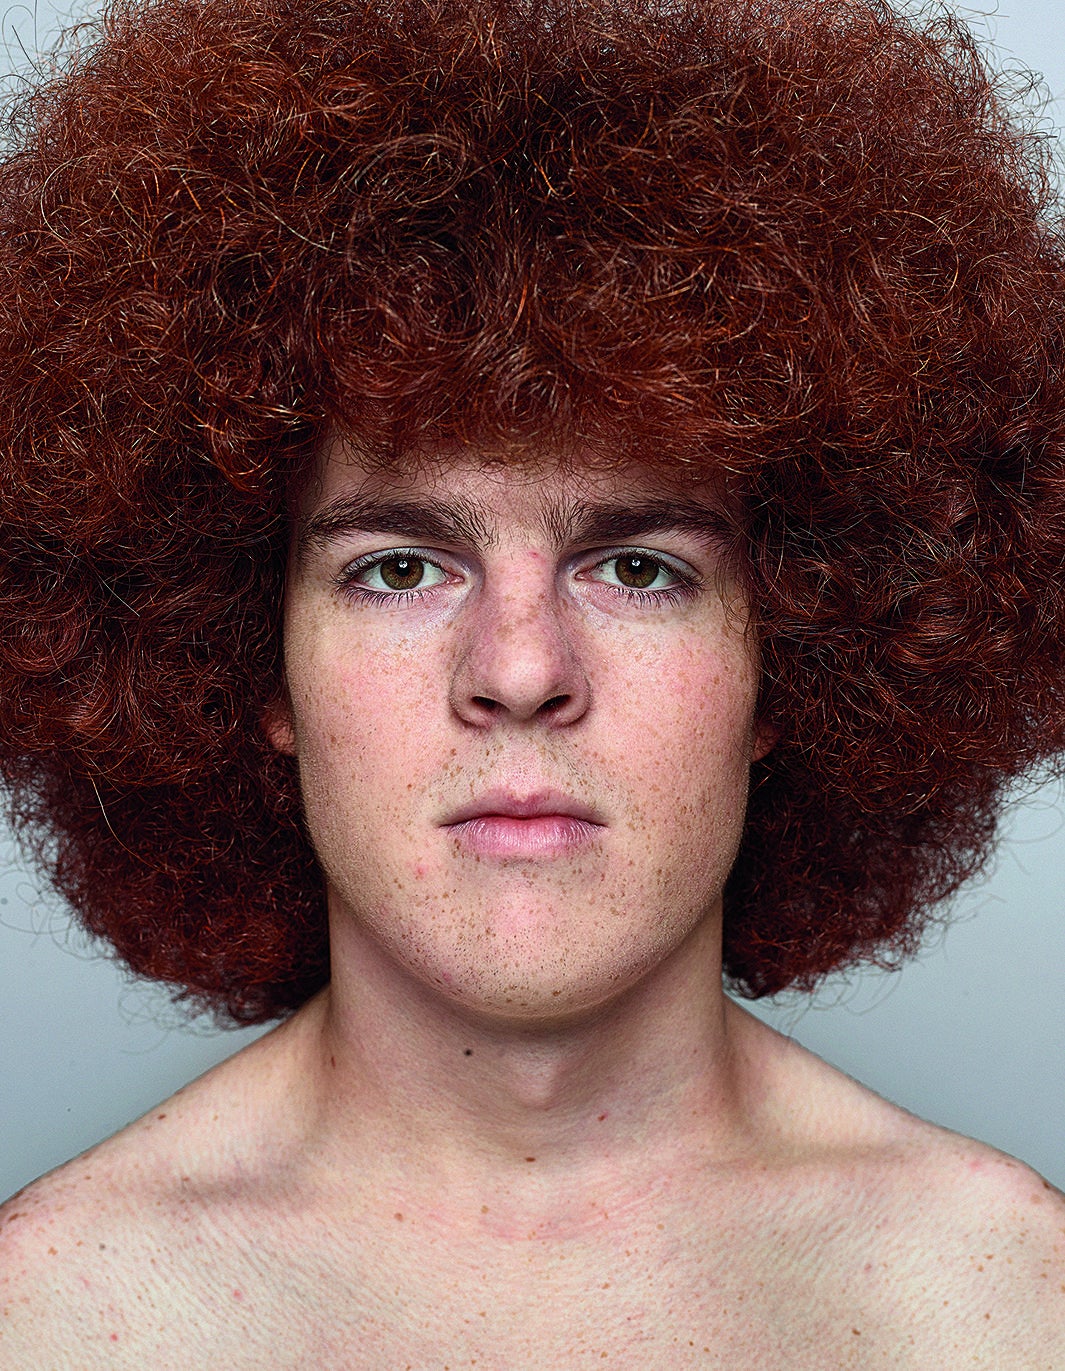 Marina Rosso photographs people with red hair in her book, The Beautiful  Gene.